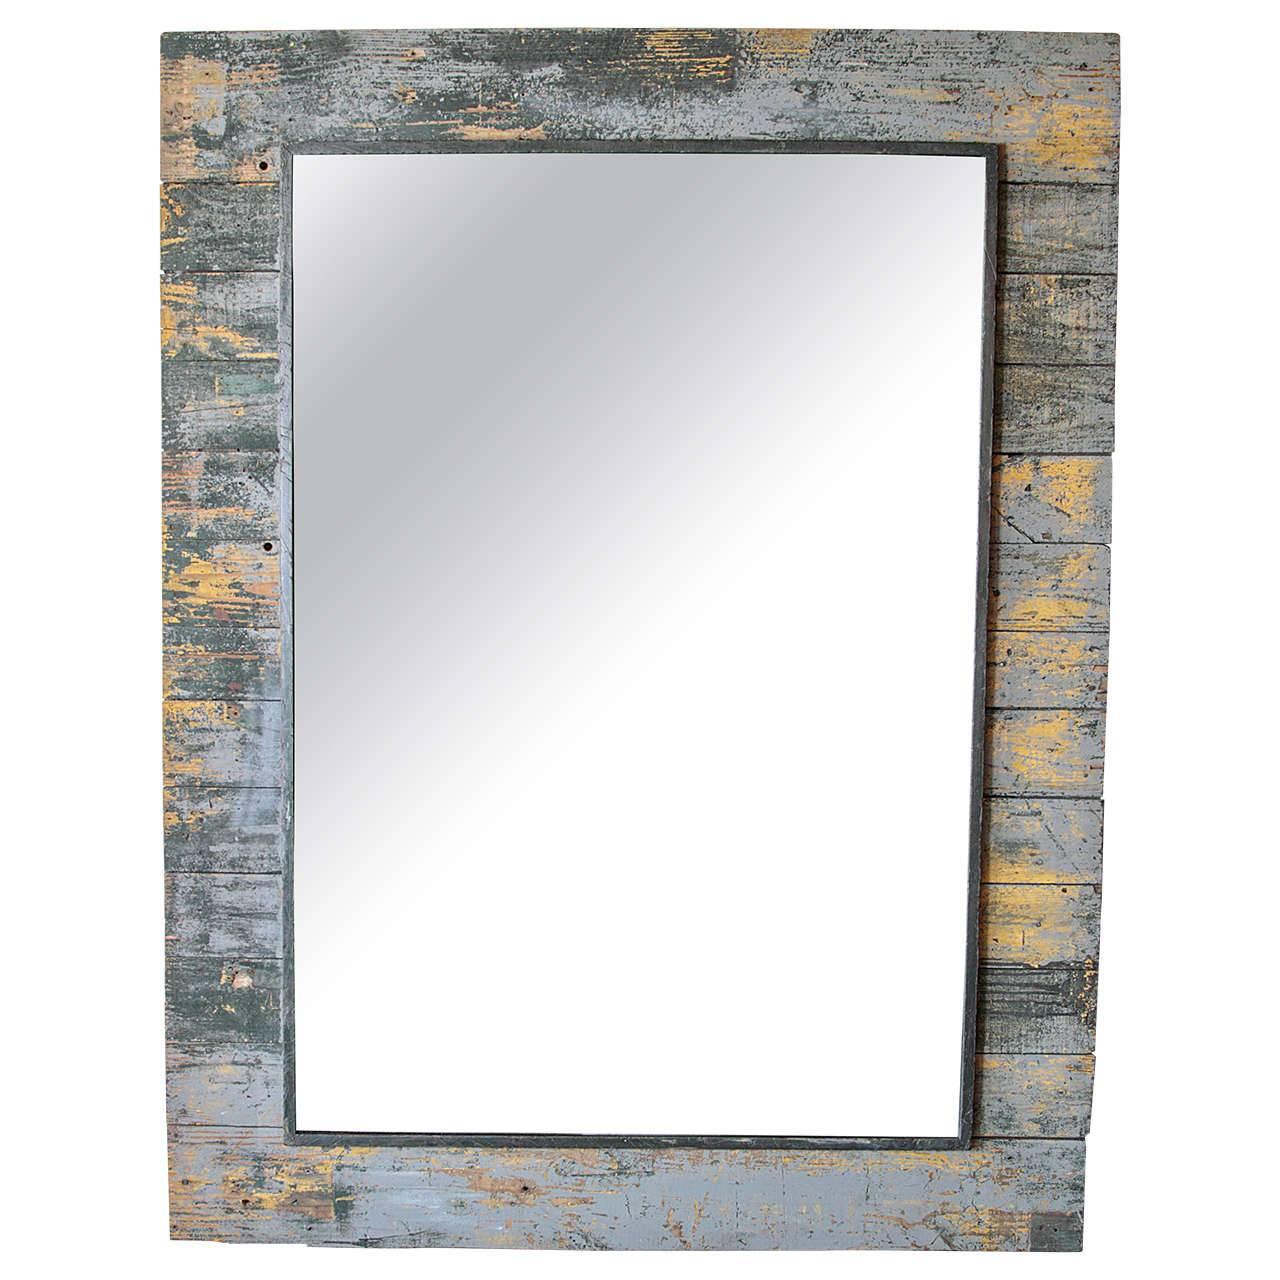 Antique Rustic French Large Mirror Frame